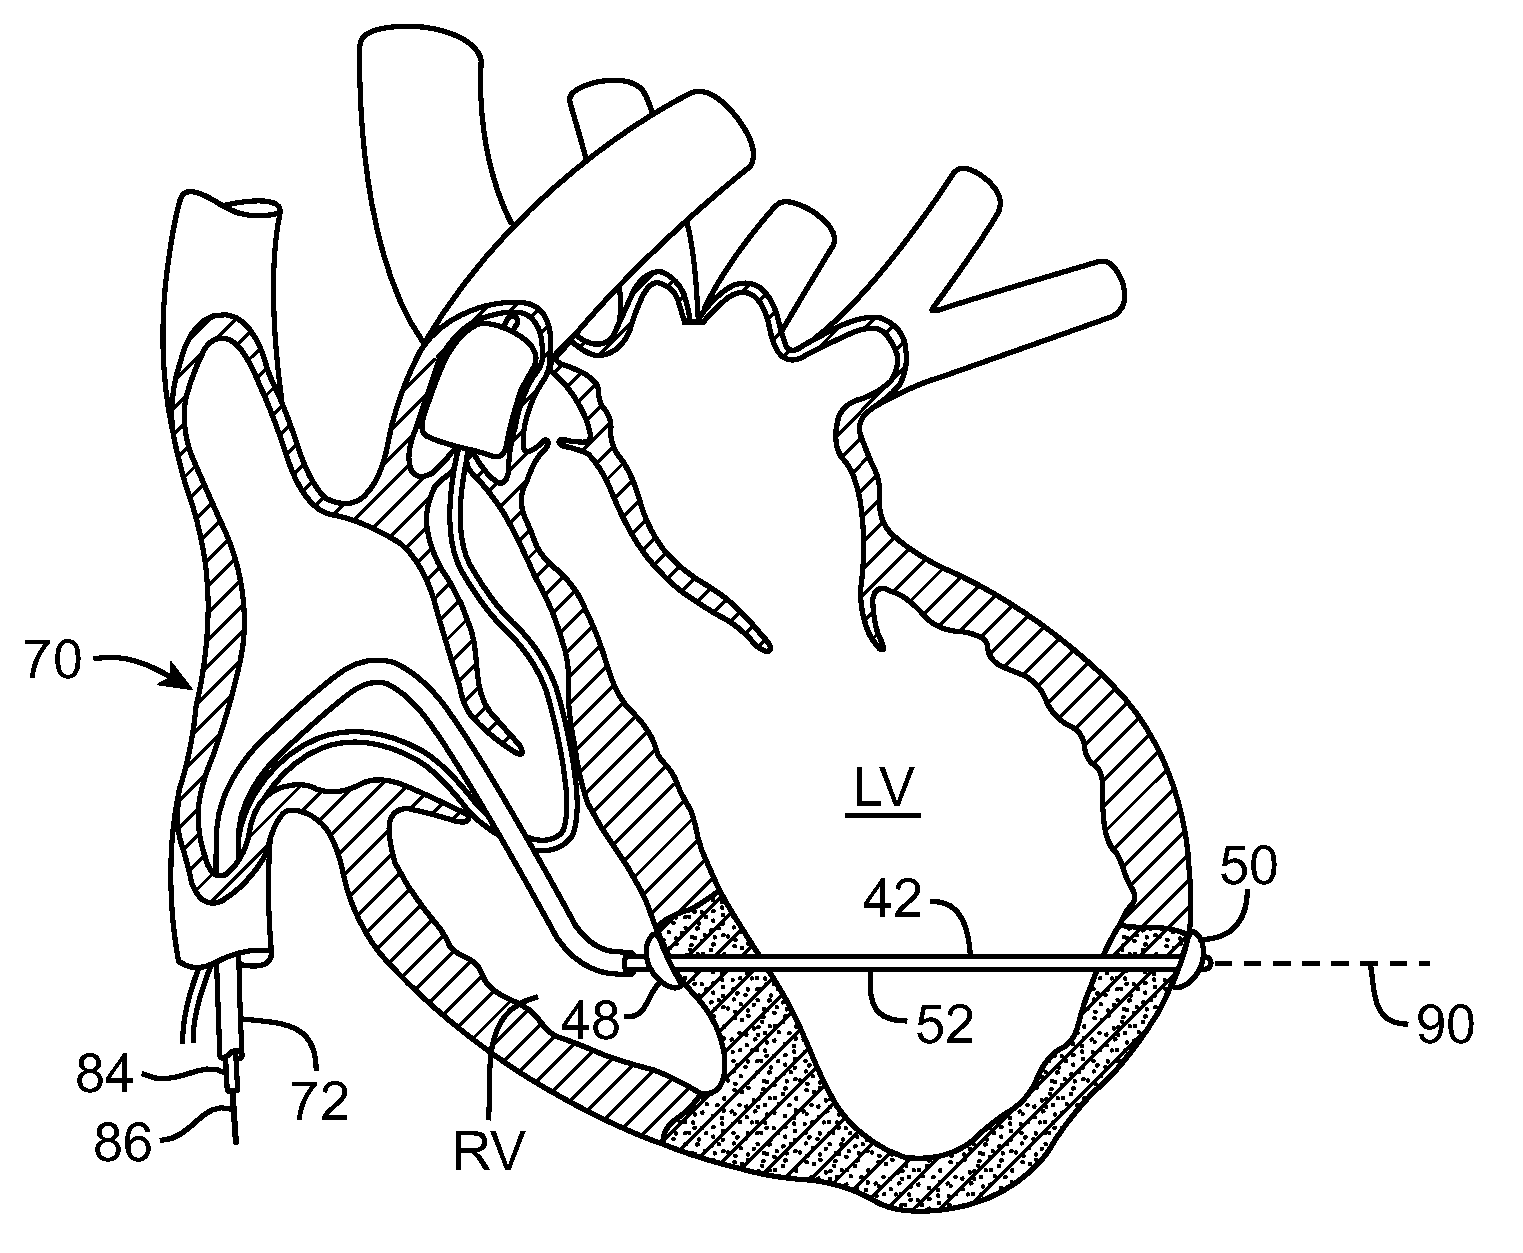 Signal Transmitting and Lesion Excluding Heart Implants for Pacing Defibrillating and/or Sensing of Heart Beat